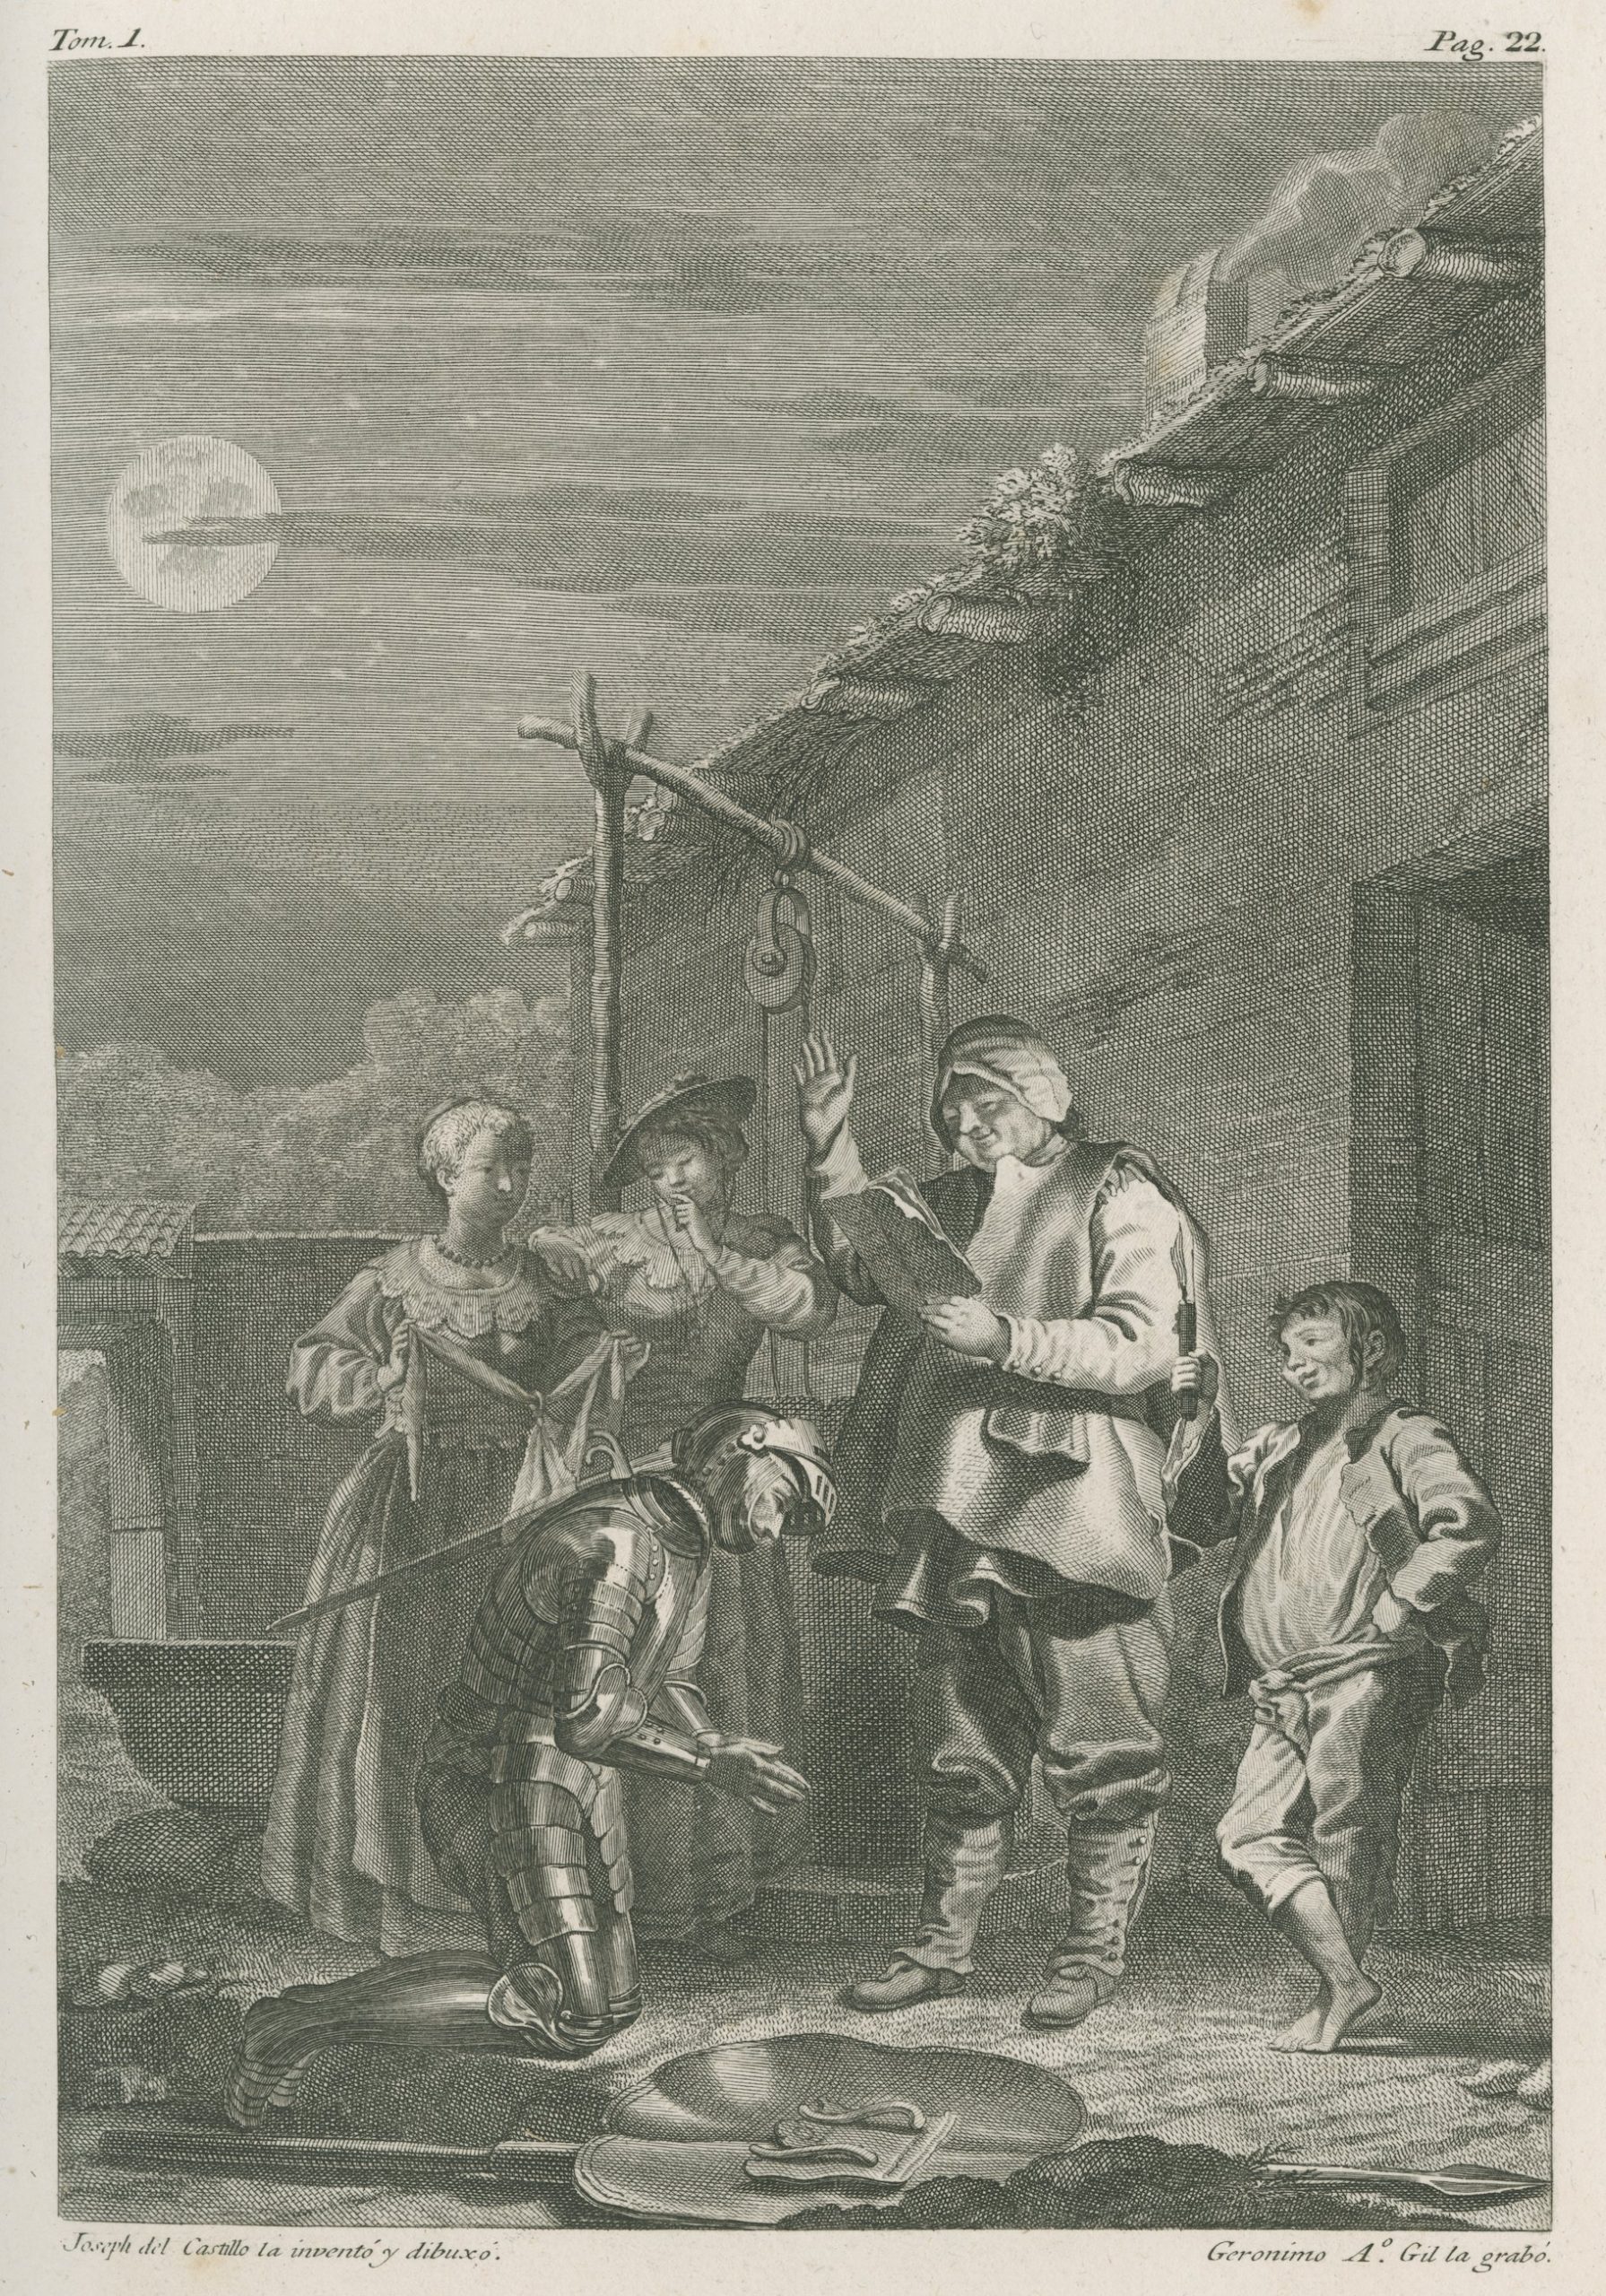 Lithograph image of a man in armor kneeling before another man who reads from a paper with his right hand raised in benediction. Two women and a boy look on.